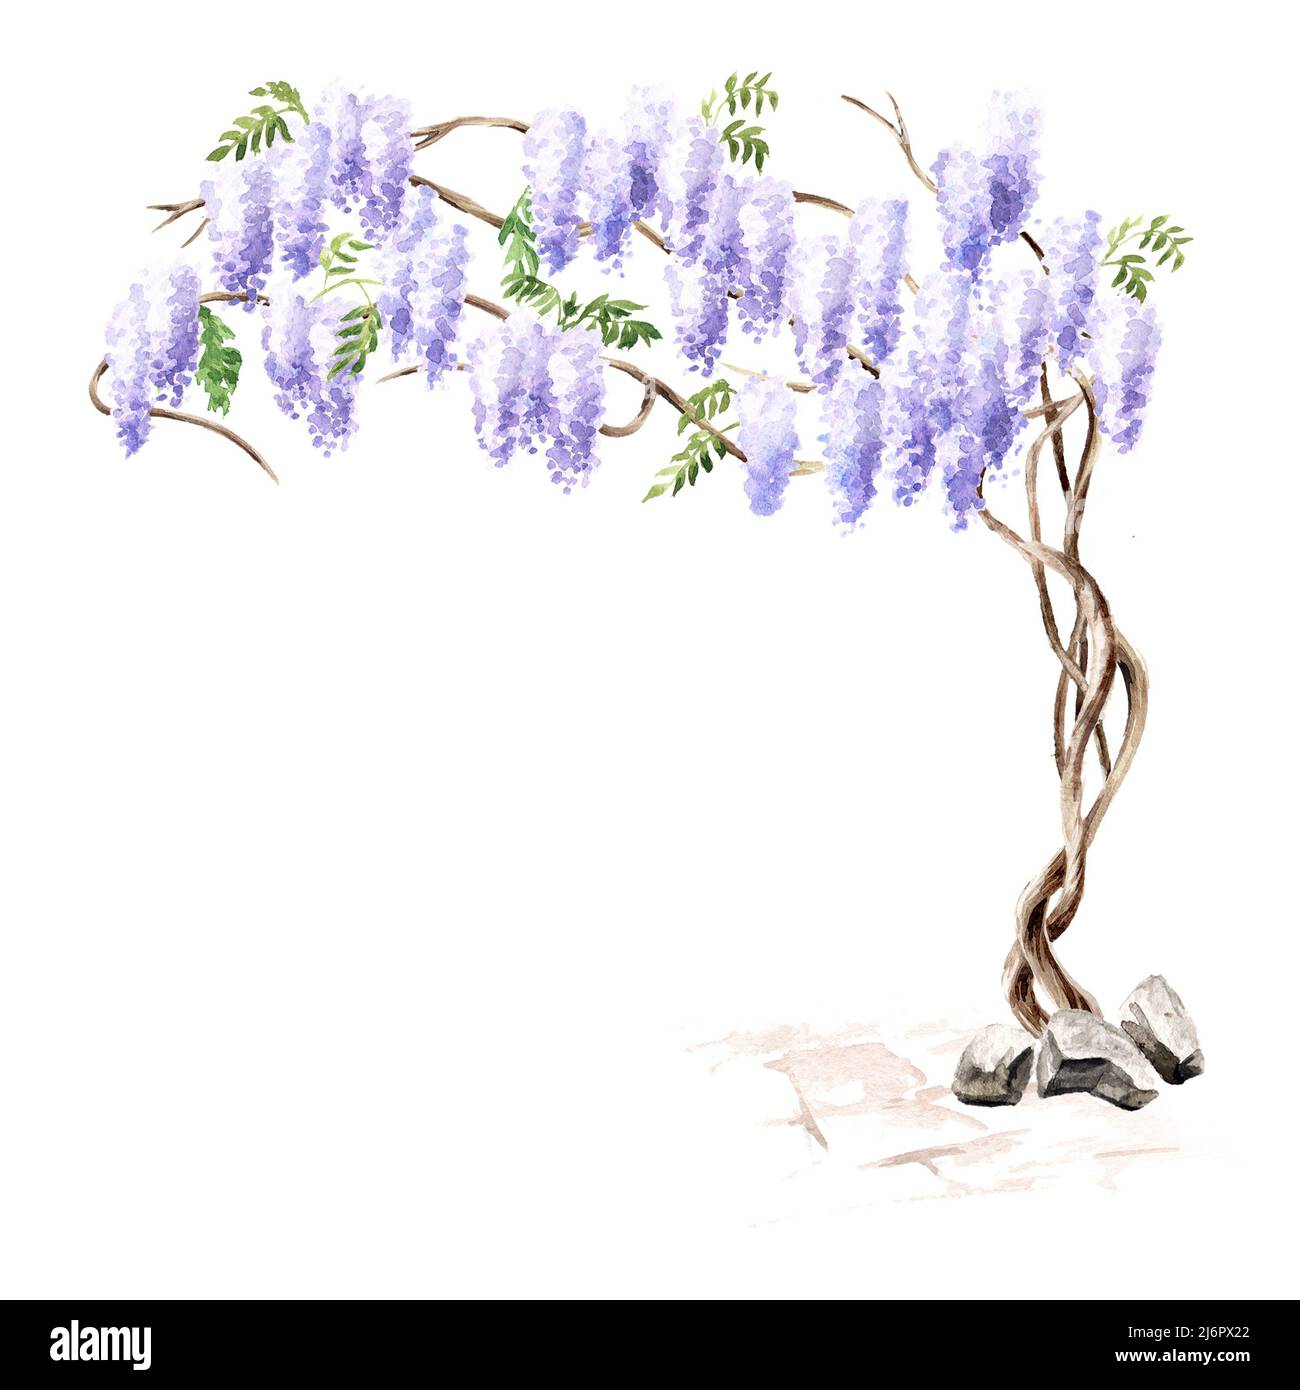 Wisteria blossom tree.  Hand  drawn watercolor  illustration isolated on white background Stock Photo